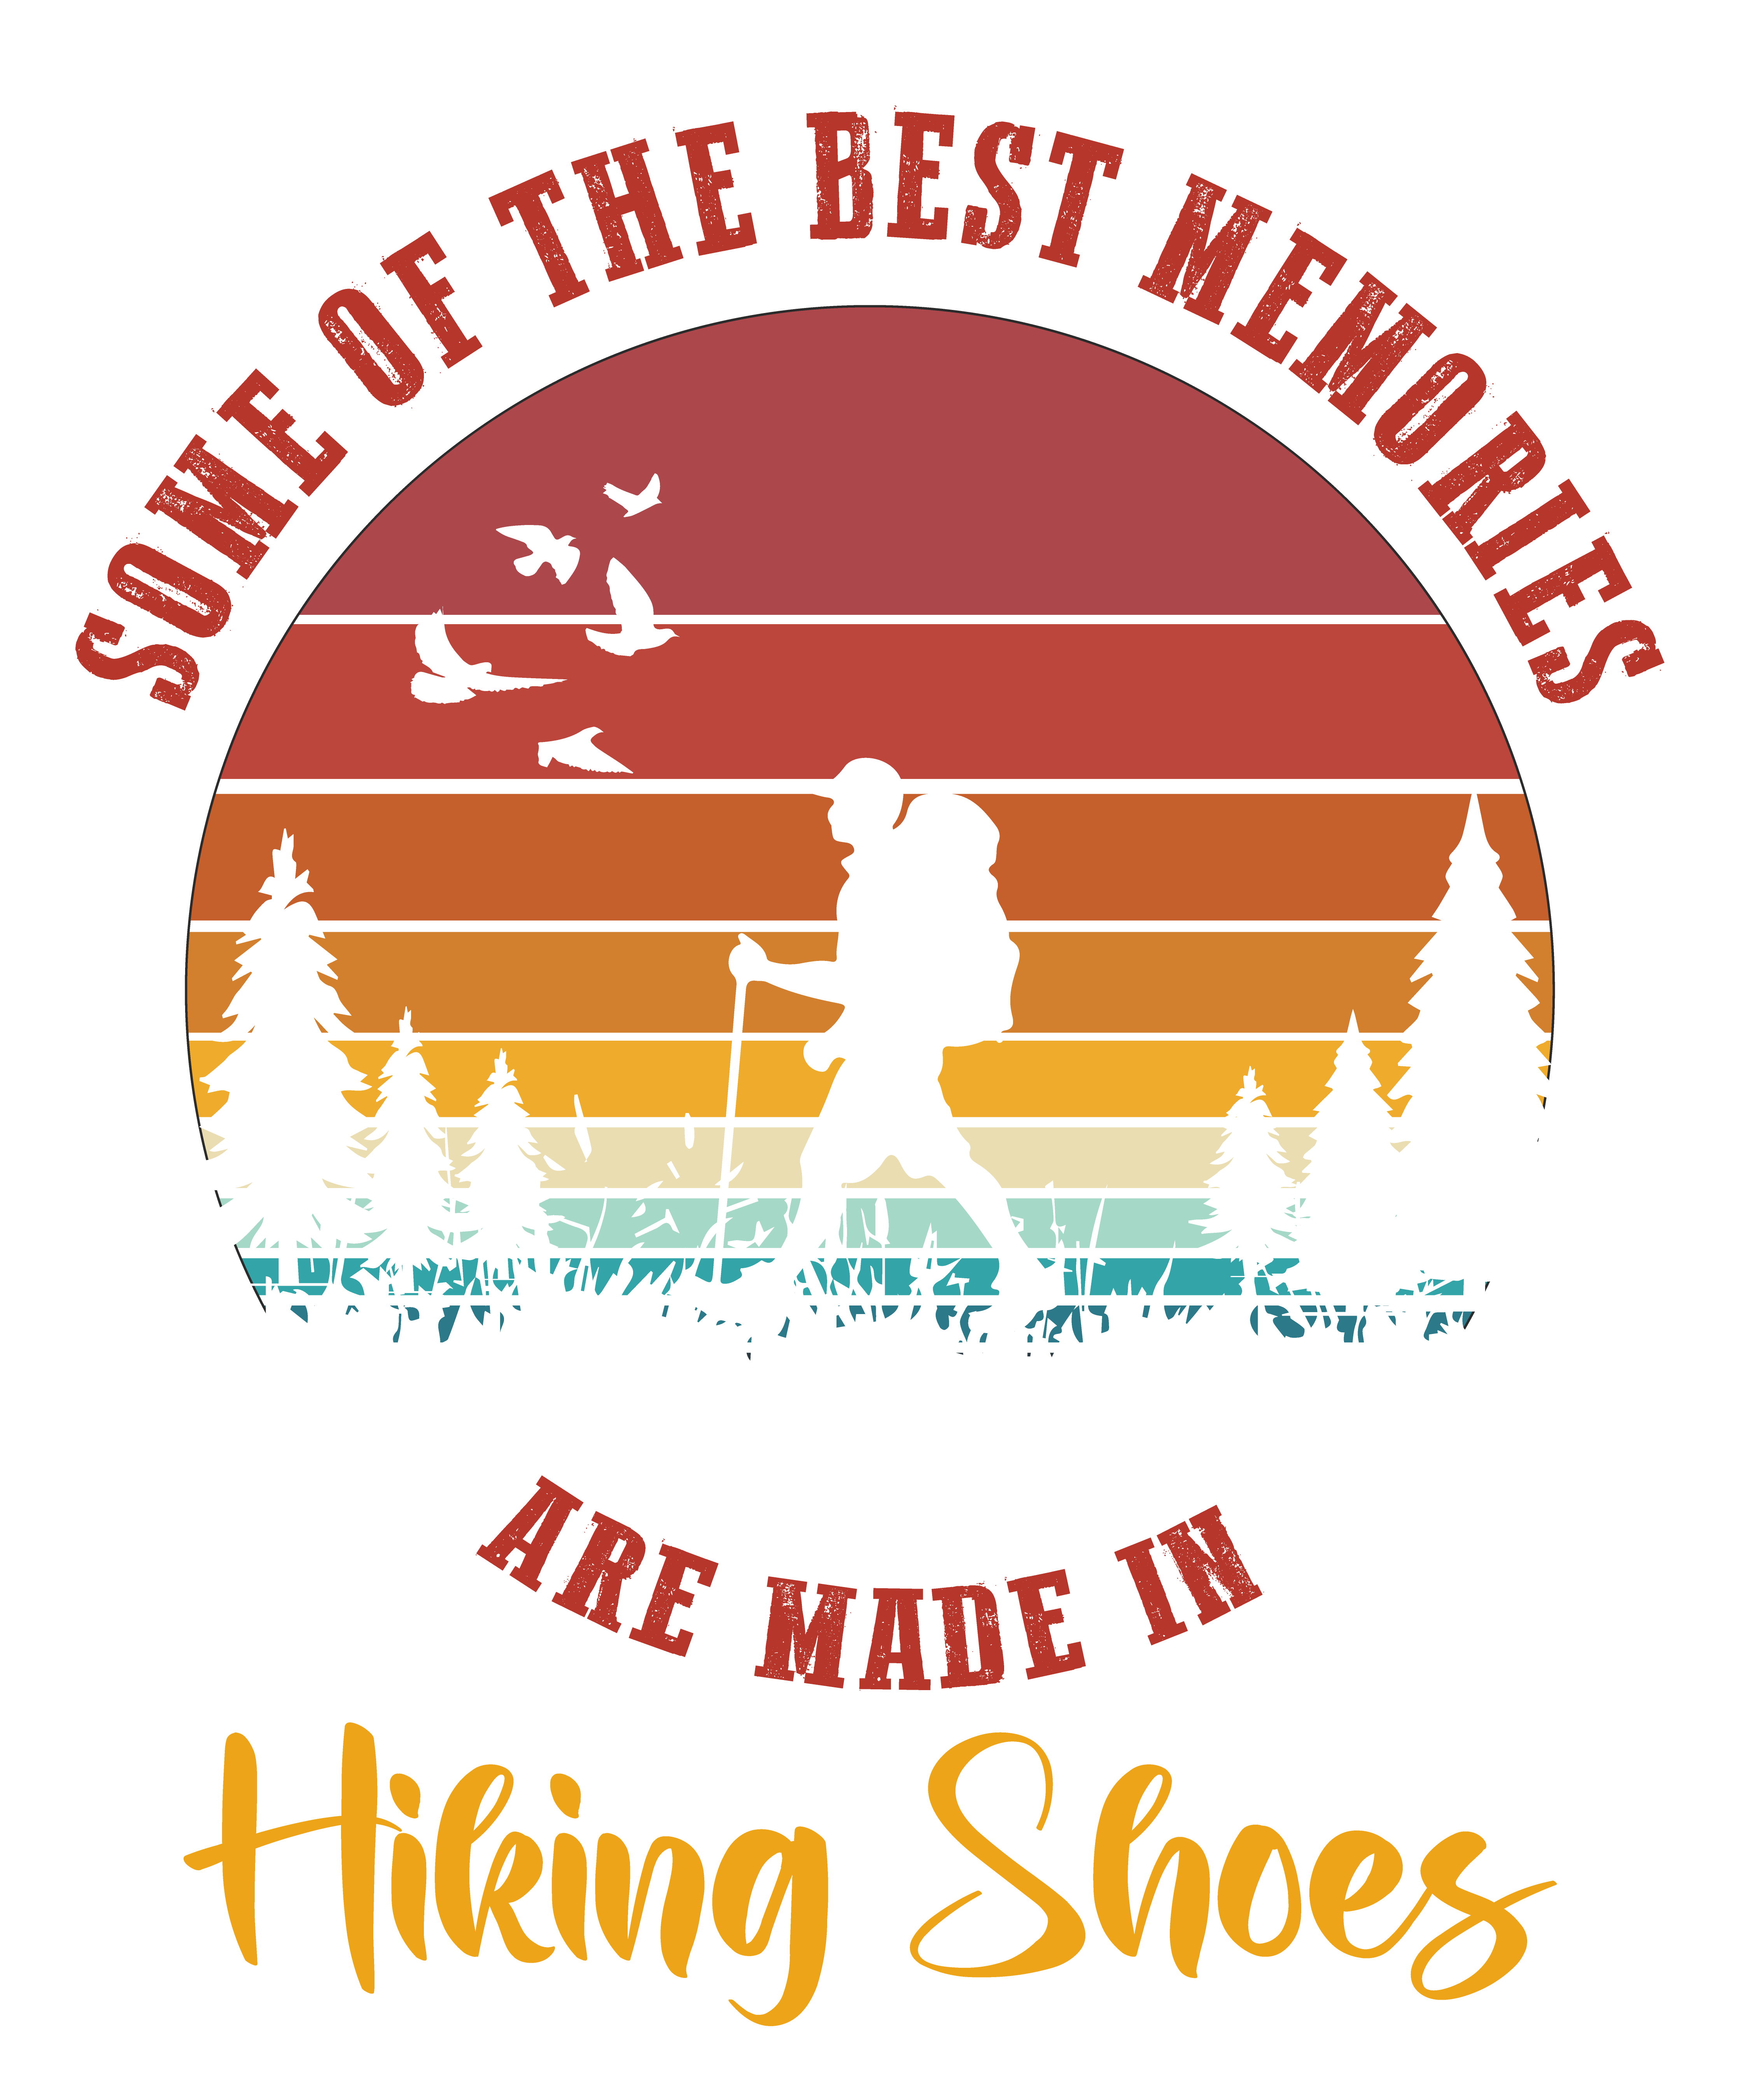 Some of the best memories are made in hiking shoes t-shirt design